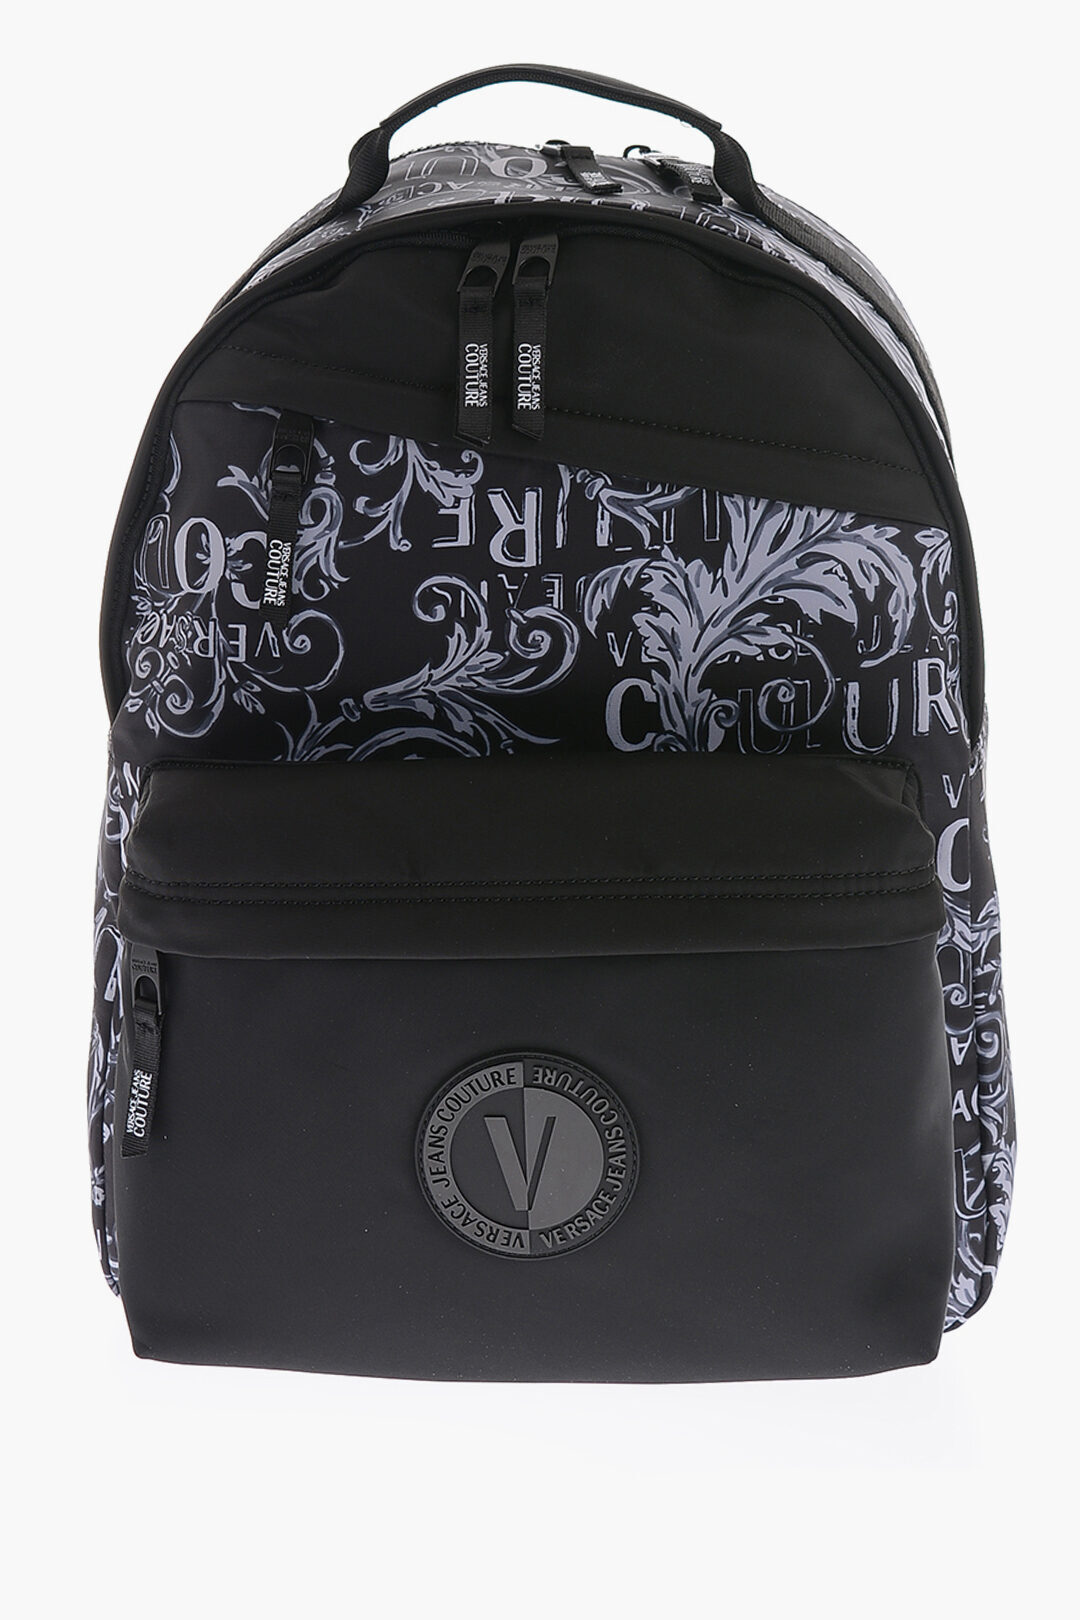  VERSACE ヴェルサーチ バックパック 74YA4B70 ZS588 PV3 メンズ JEANS COUTURE BAROQUE PATTERNED FABRIC BACKPACK  dk